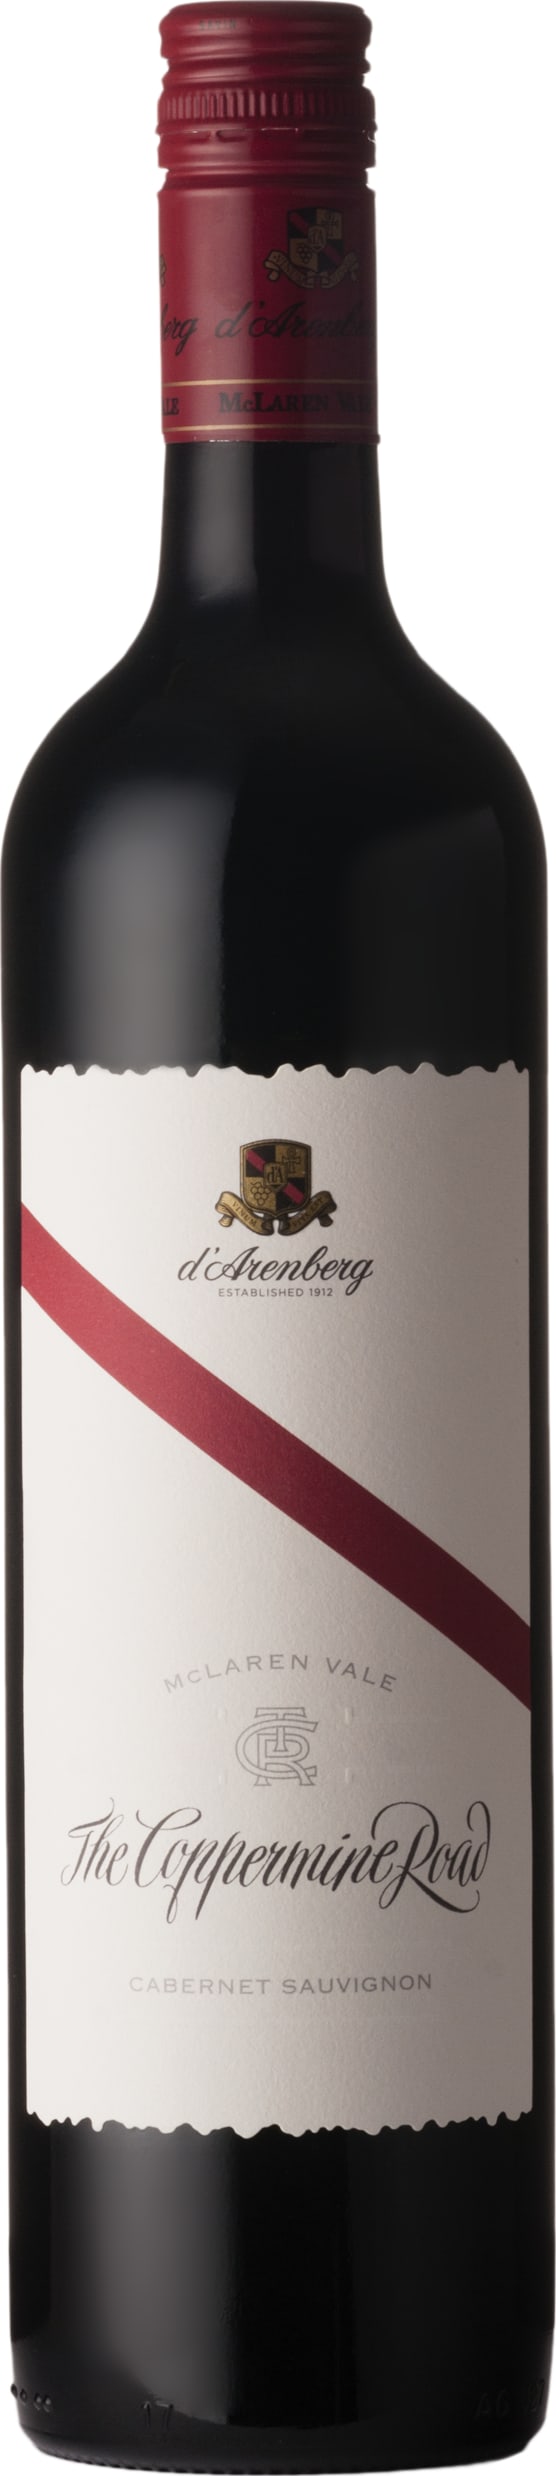 D Arenberg The Coppermine Road Cabernet Sauvignon 2019 75cl - Buy D Arenberg Wines from GREAT WINES DIRECT wine shop